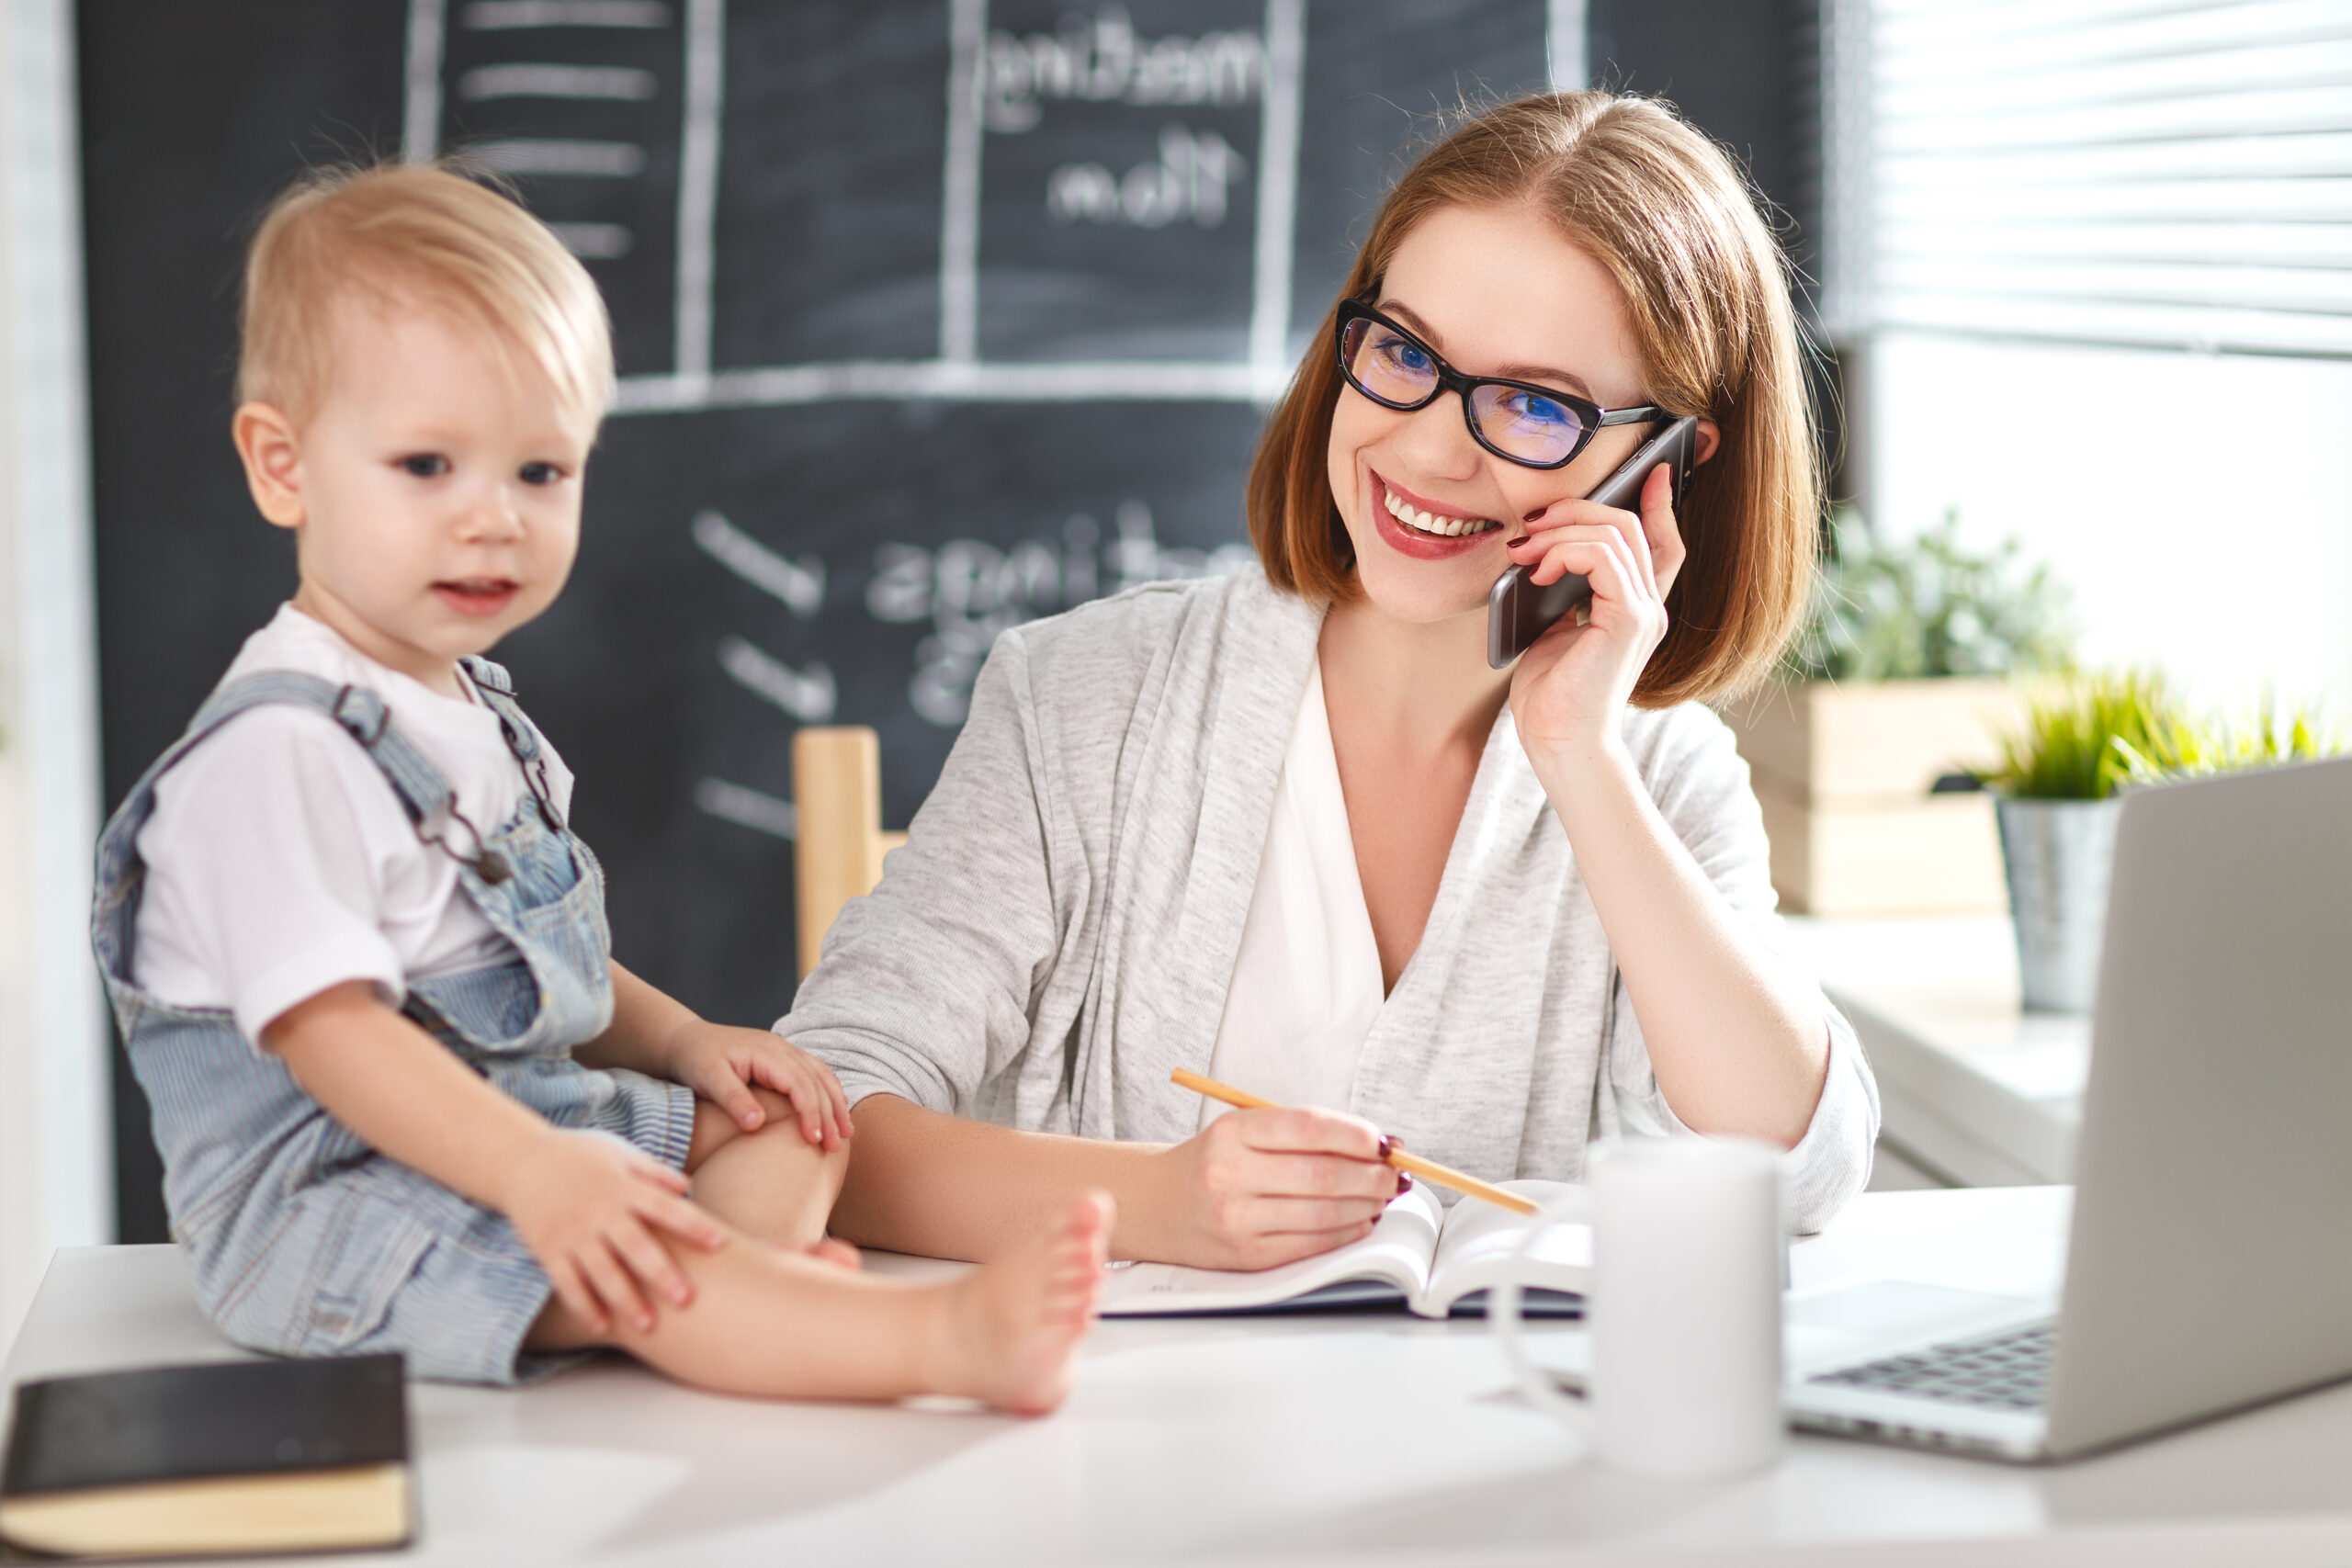 HOW TO BECOME A MOMPRENEUR